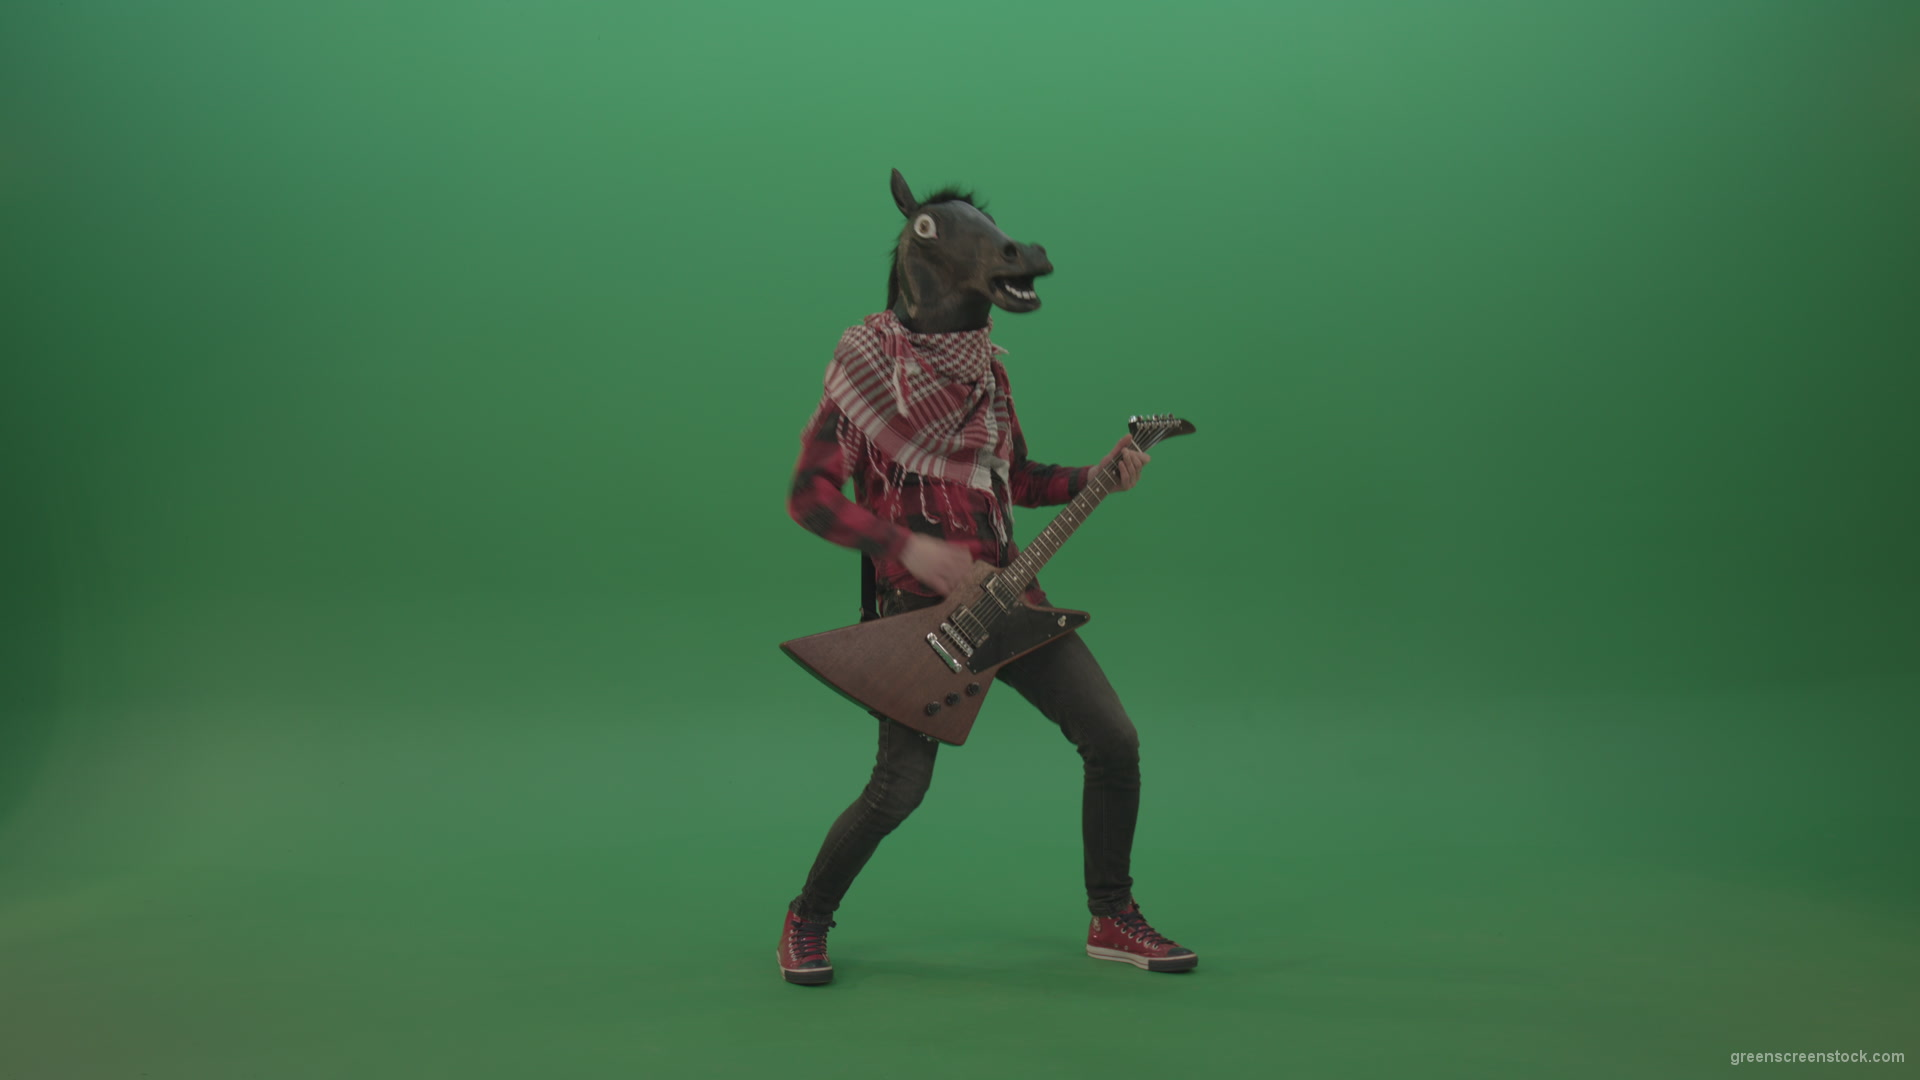 Green-screen-horse-man-guitaris-play-hard-rock-music-with-guitar-isolated-on-green-background_008 Green Screen Stock